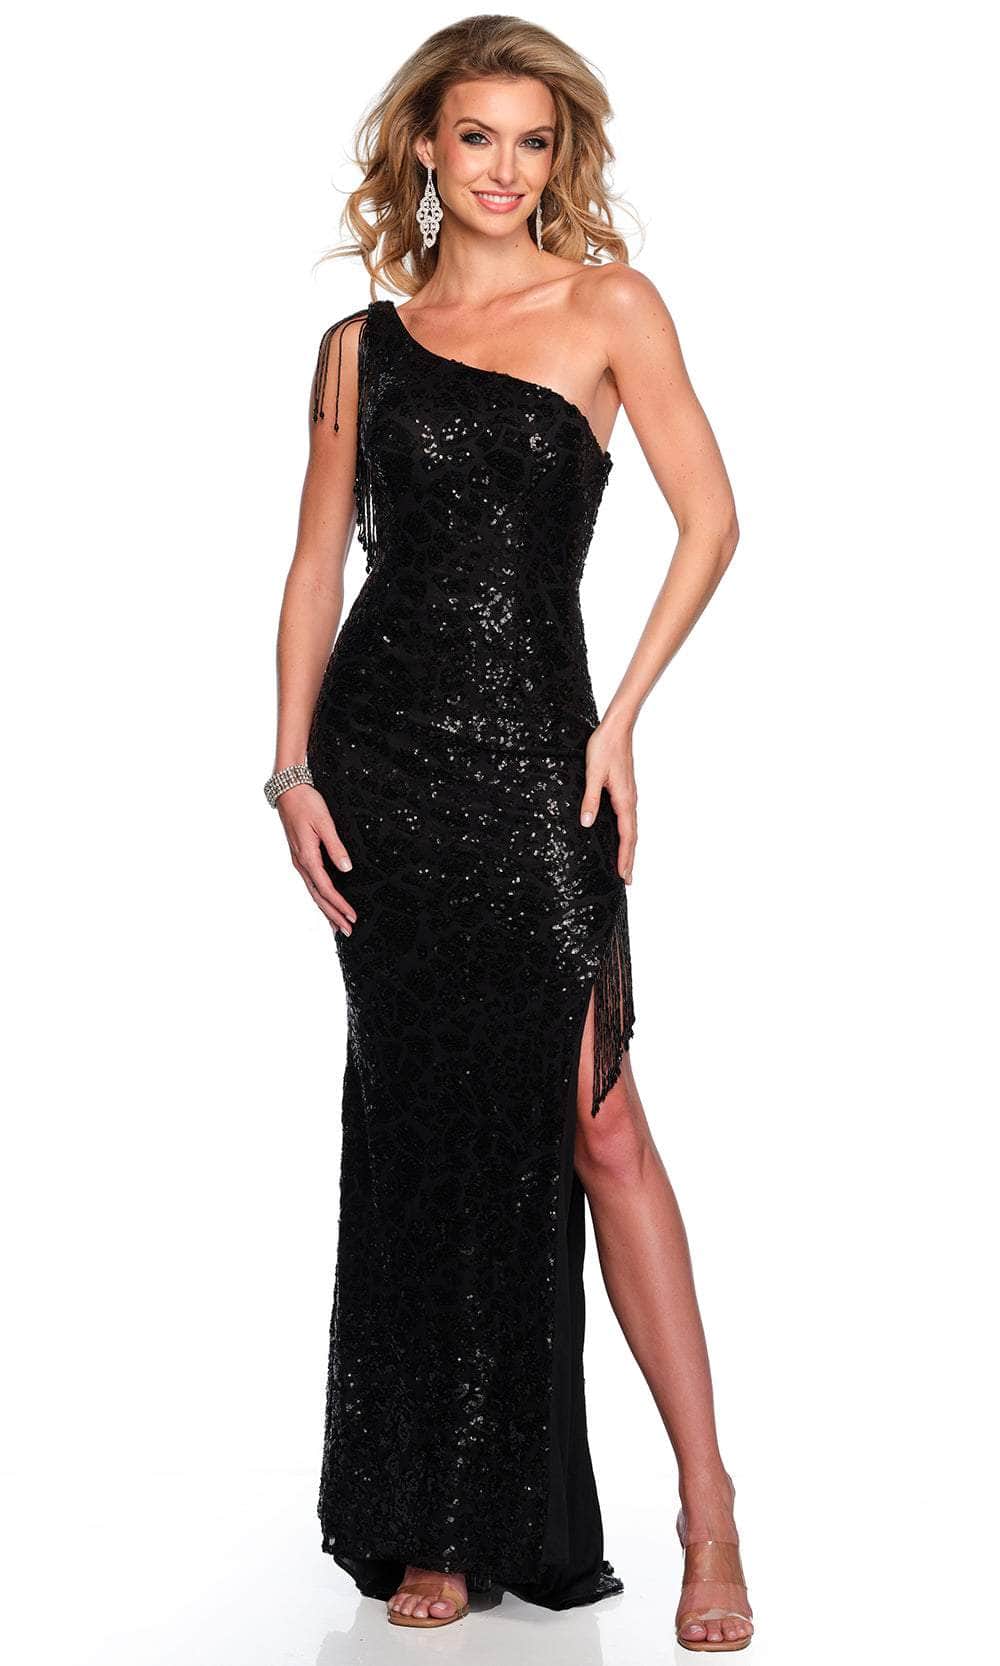 Image of Dave & Johnny 11433 - Sequin Asymmetrical Neck Evening Gown